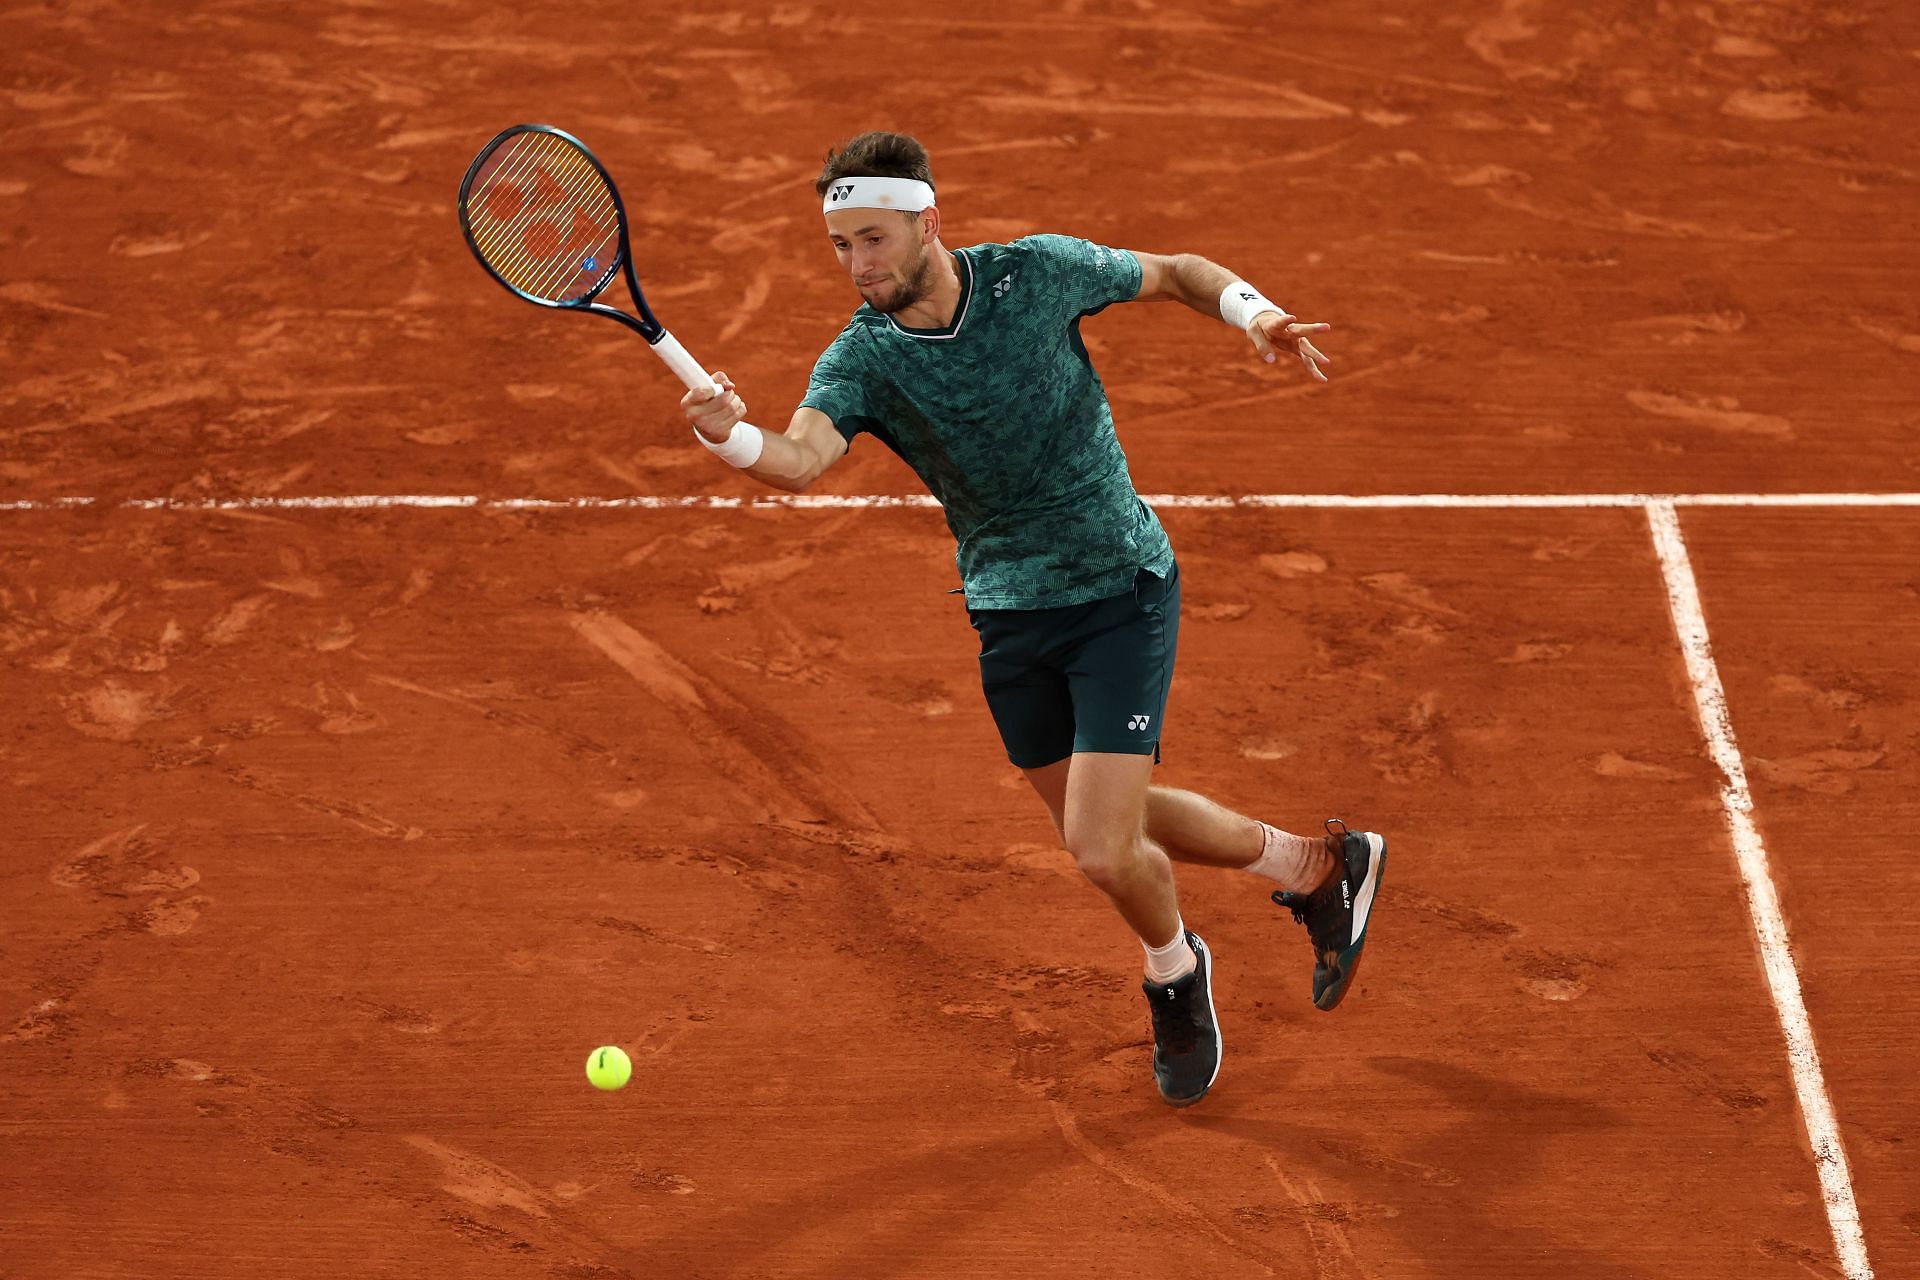 Ruud in action at the 2022 French Open - Day 13